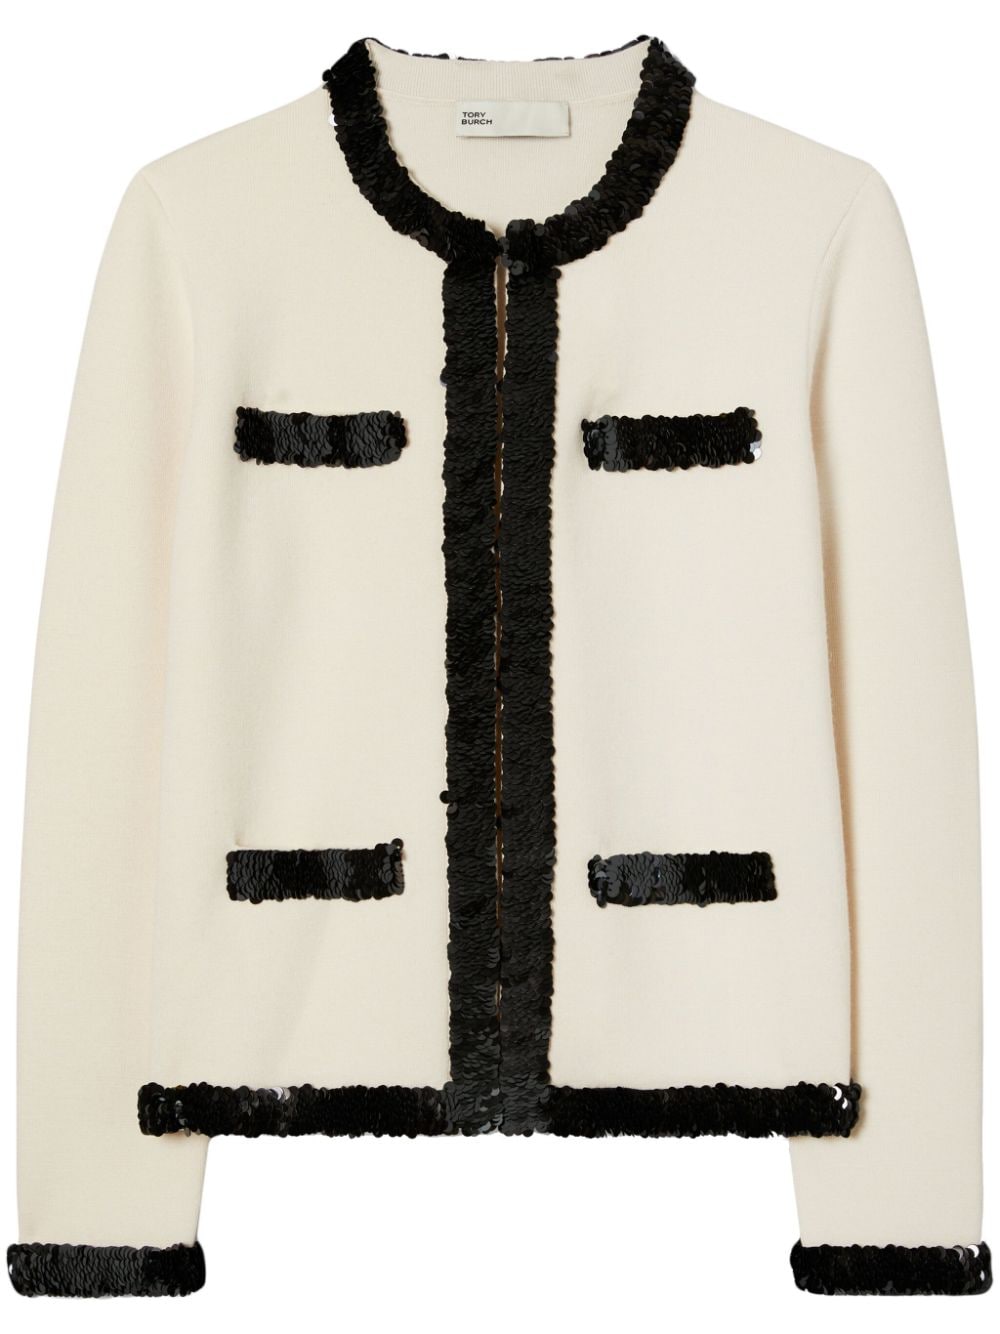 TORY BURCH Cream White and Black Sequined Wool Jacket for Women